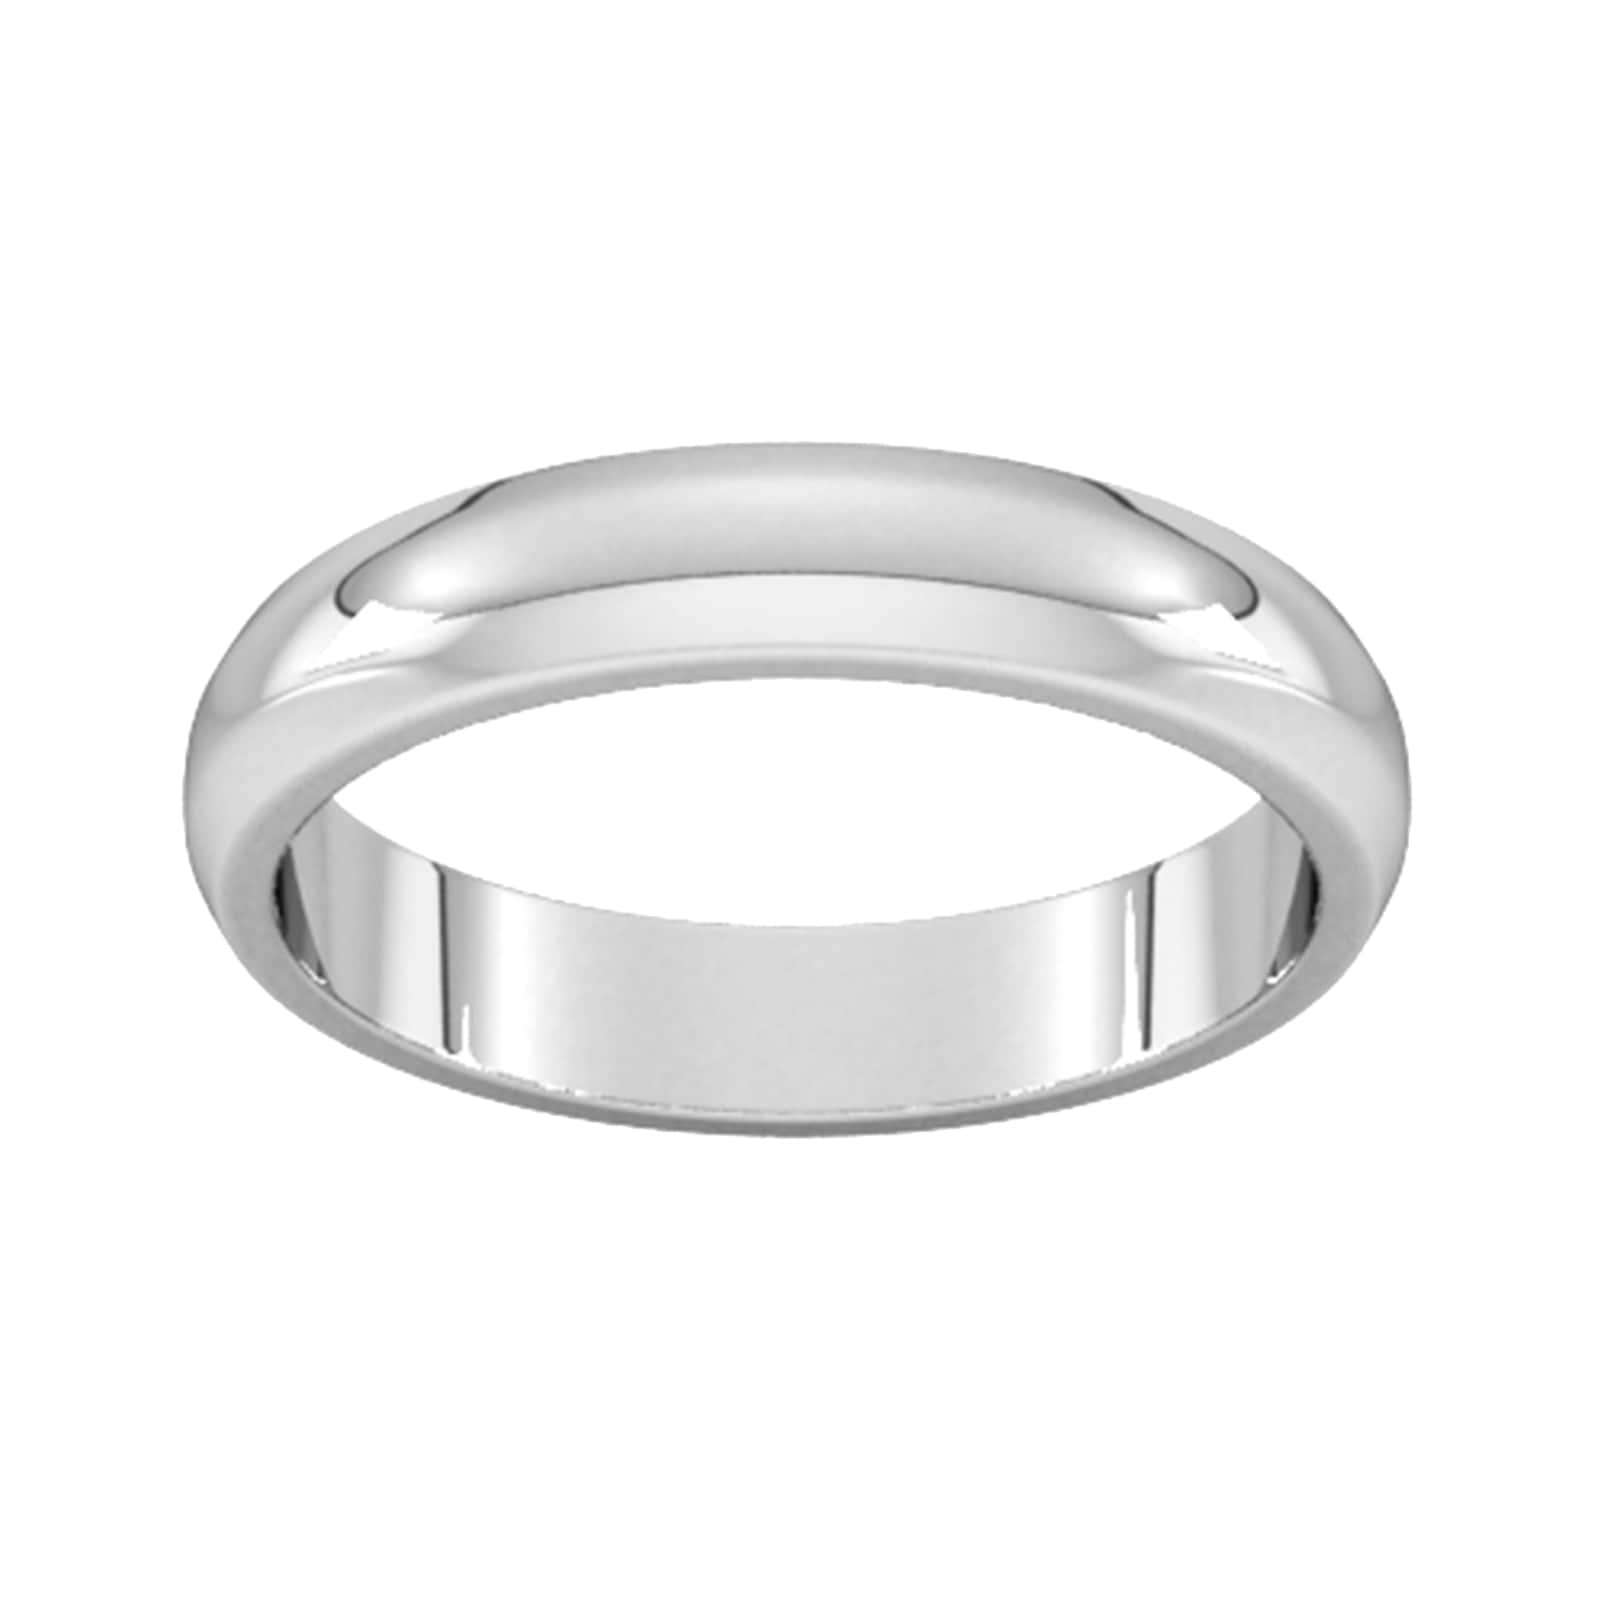 4mm D Shape Heavy Wedding Ring In Sterling Silver - Ring Size S